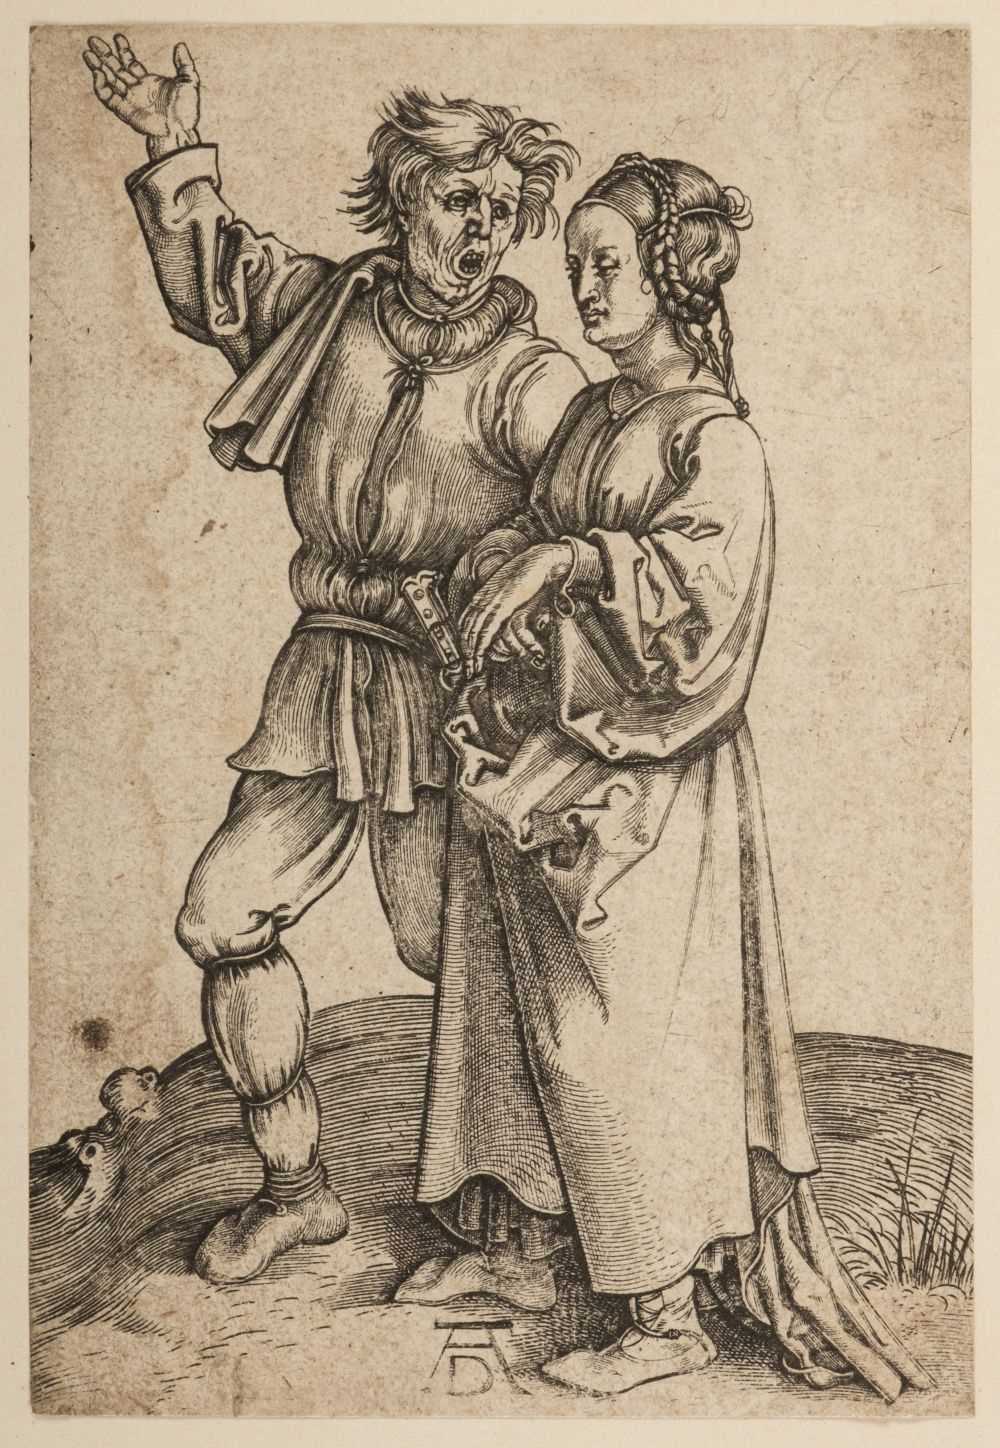 Lot 385 - Durer, Albrecht, 1471-1528. The Peasant and his Wife (Rustic Couple), 1497